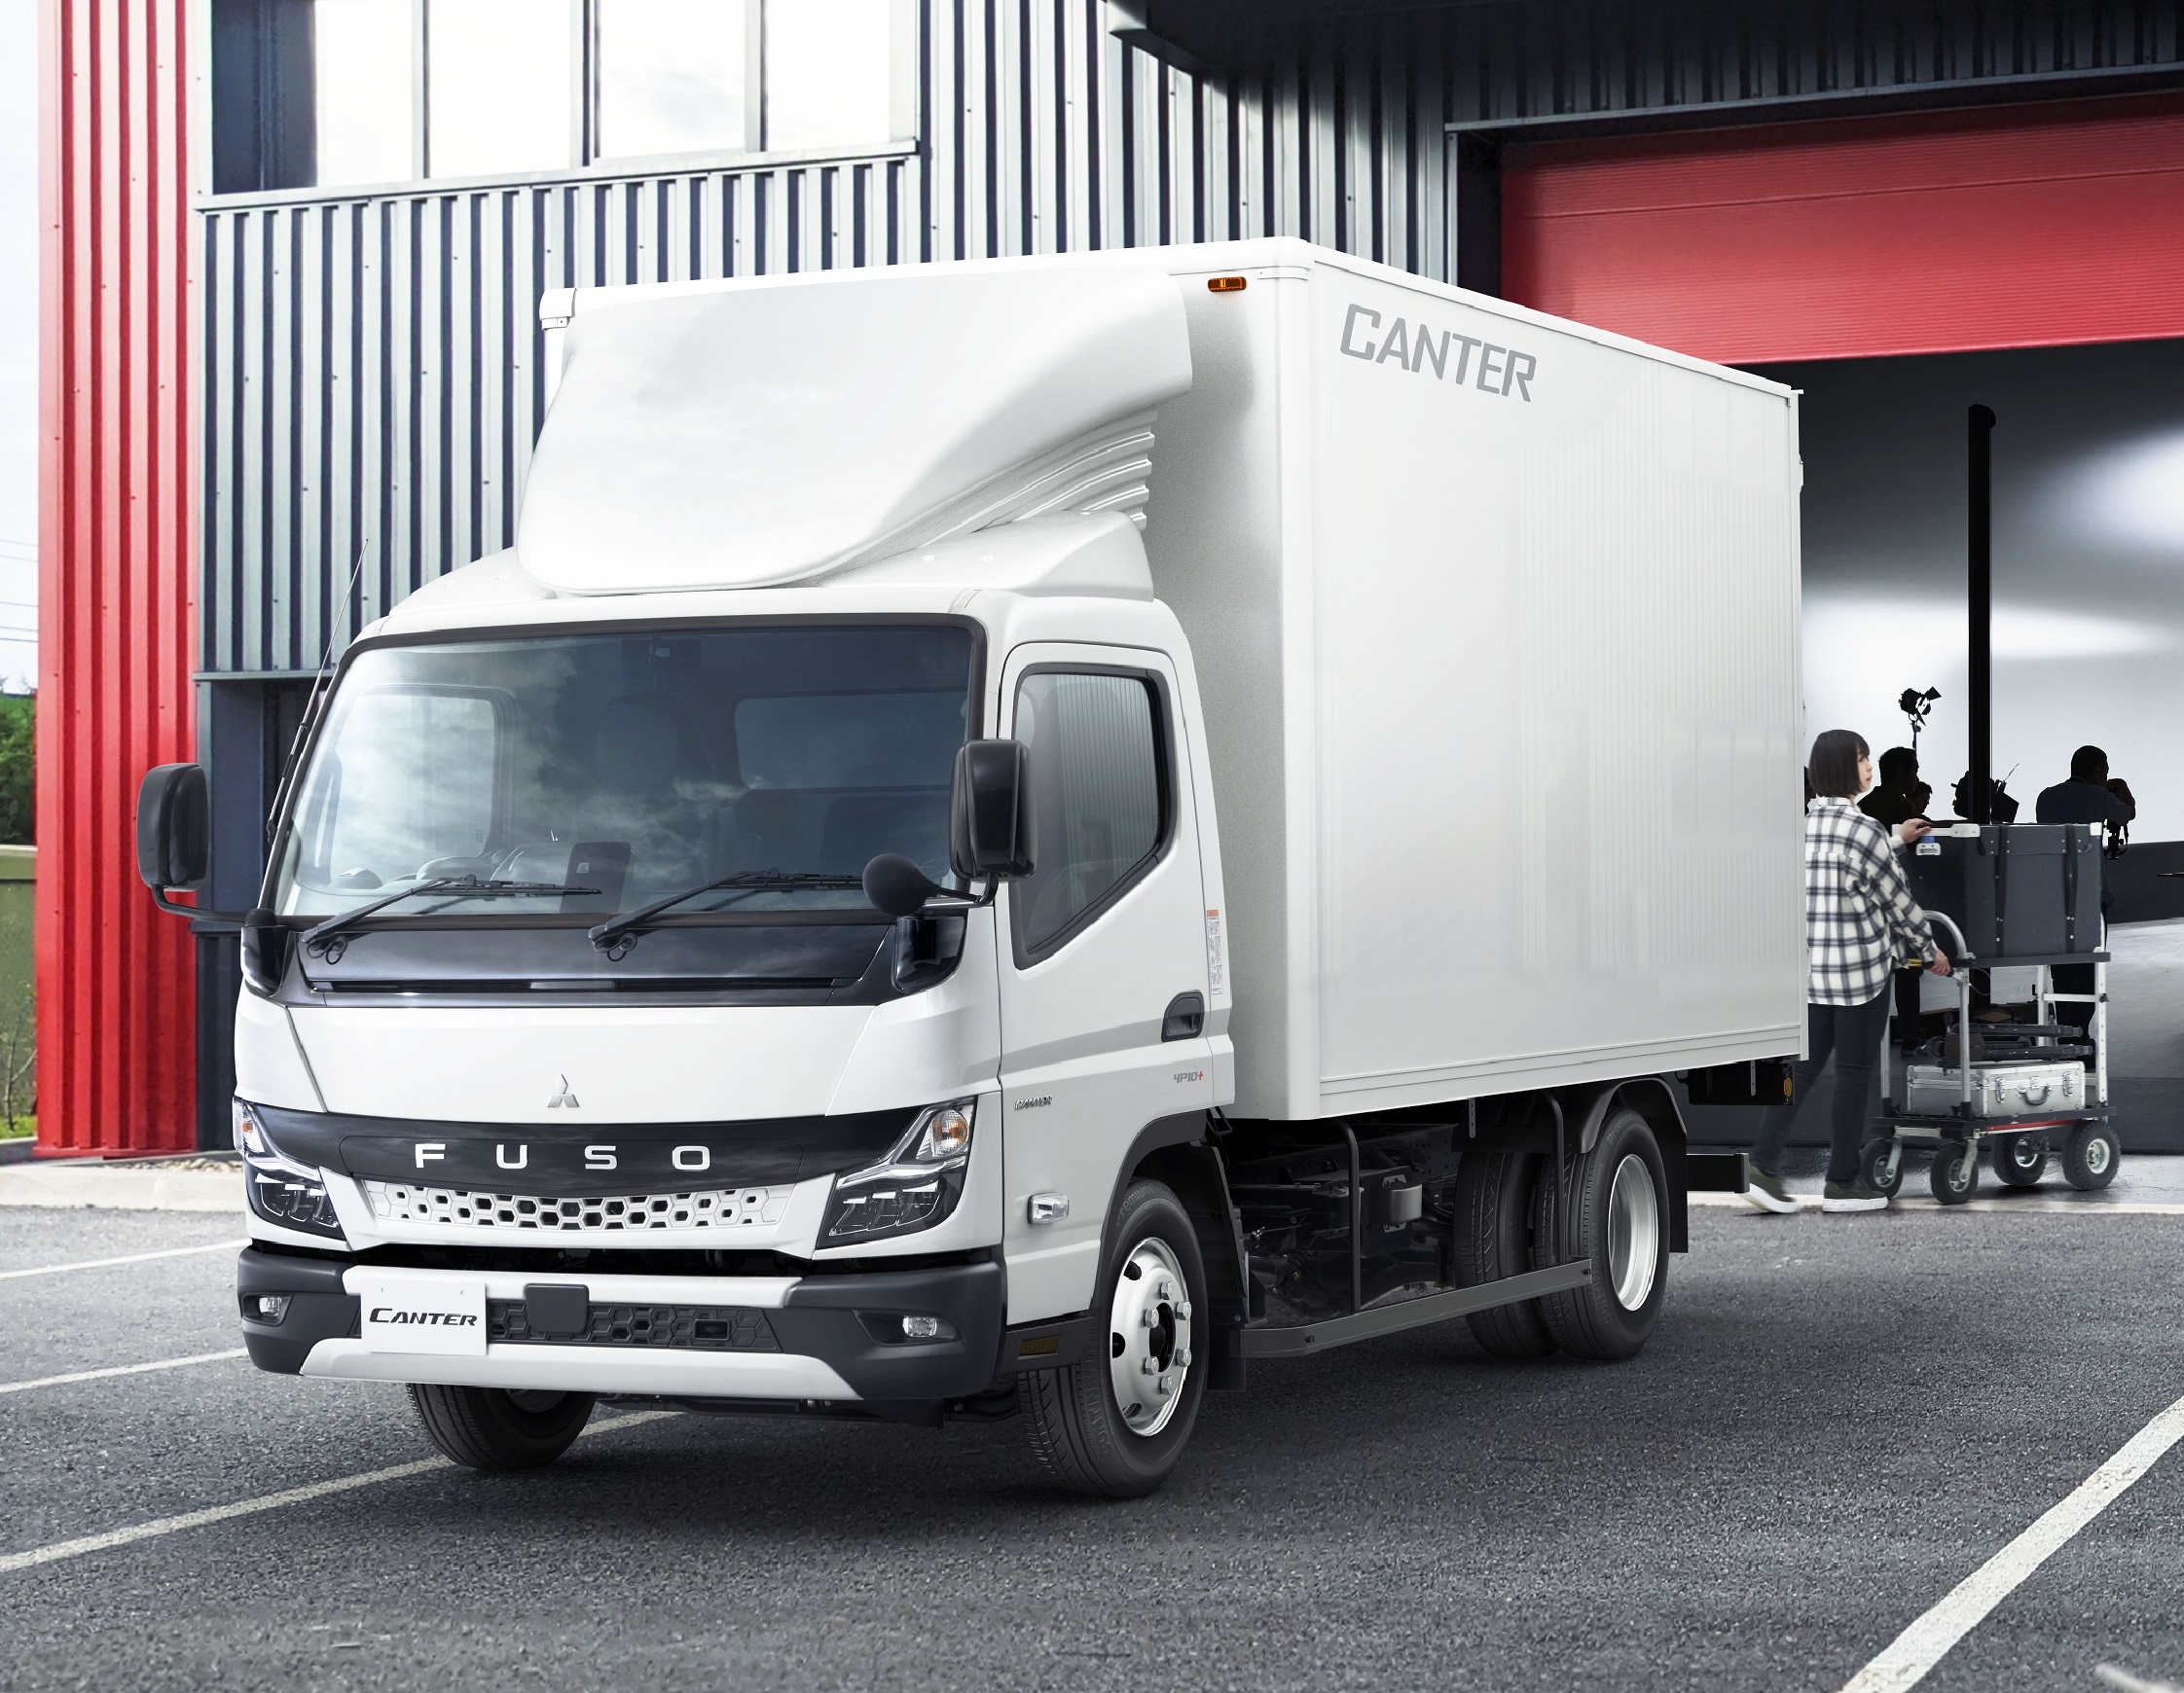 Mitsubishi Fuso launches the new light-duty Canter truck in Japan